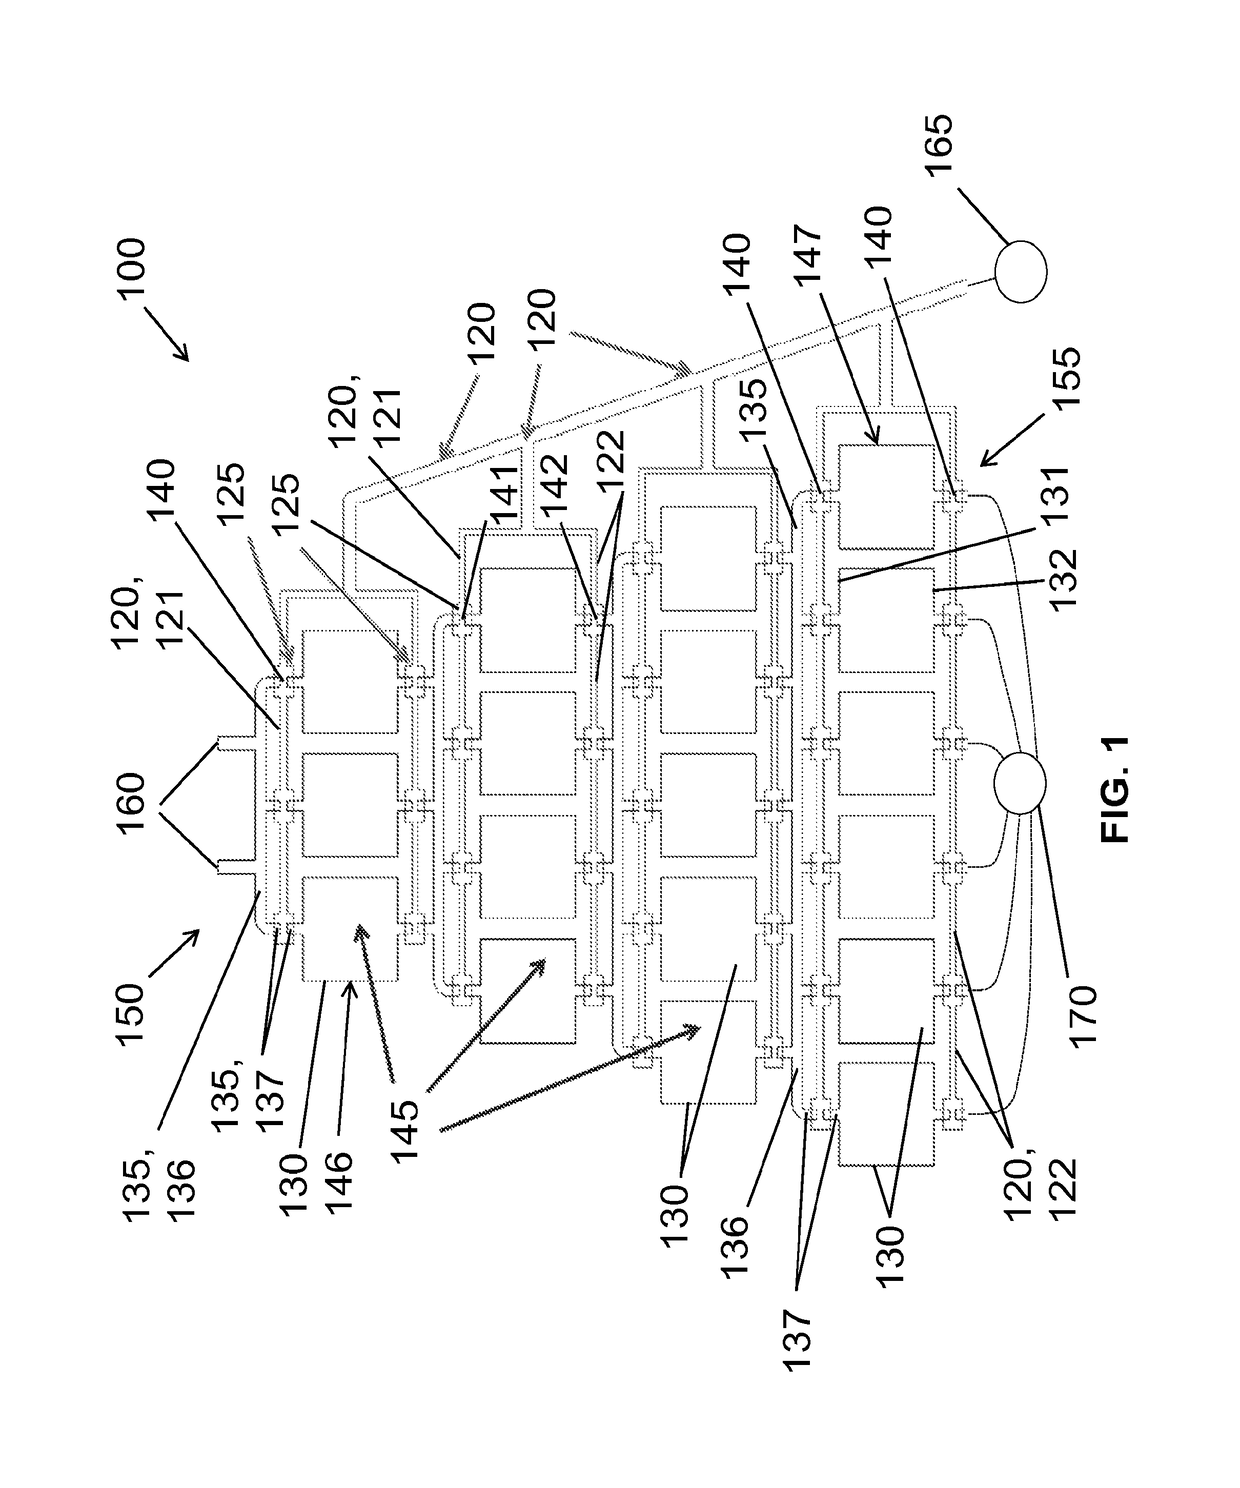 Methods, systems and apparatus for microfluidic crystallization based on gradient mixing